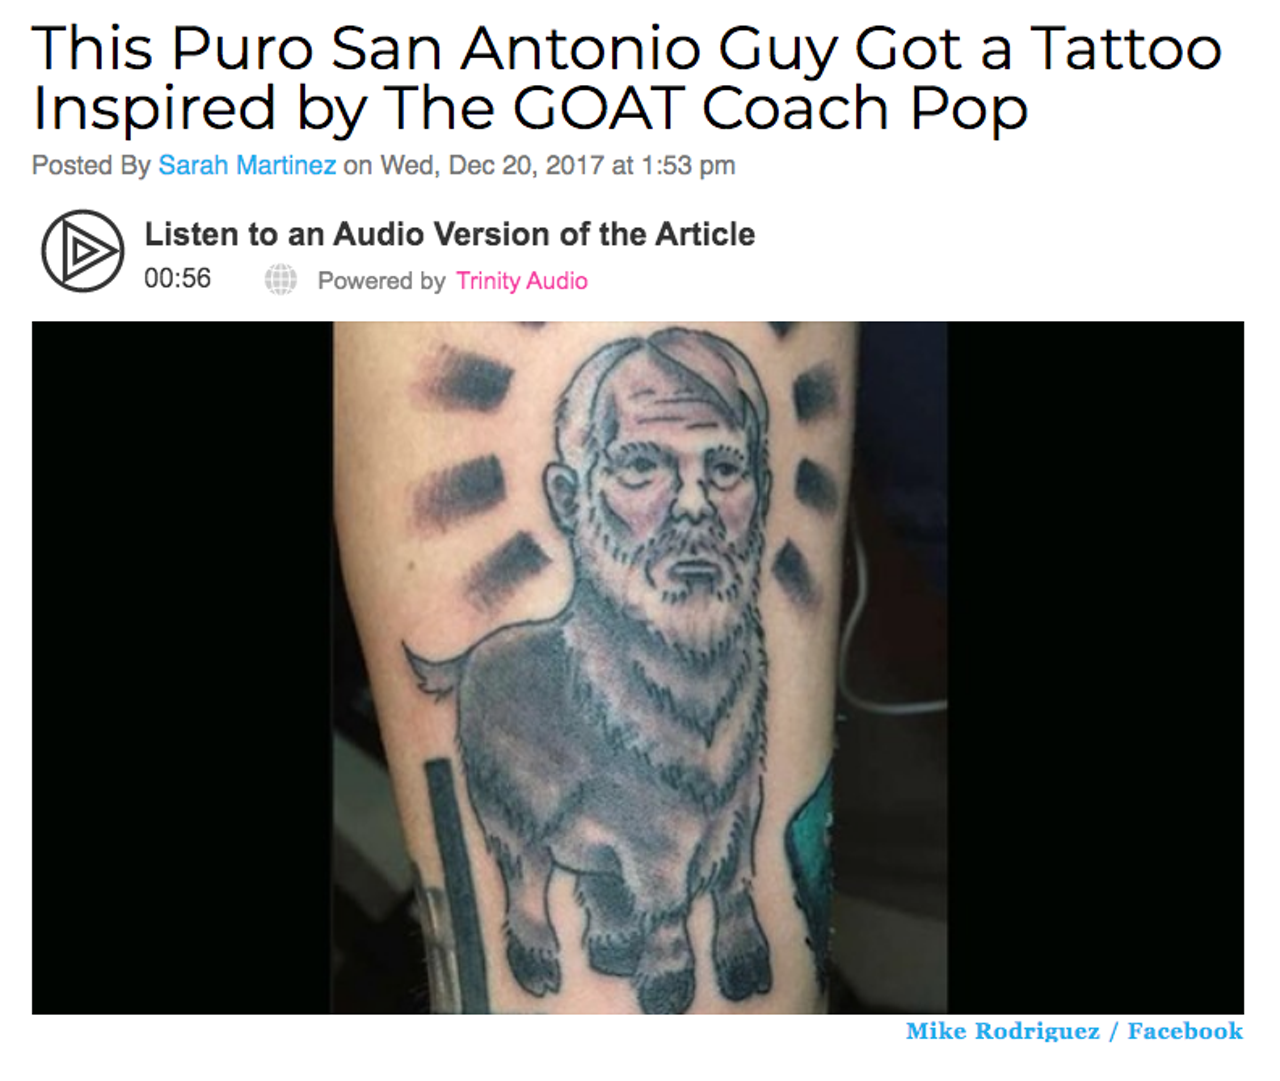 Folks may not get tattoos of NBA coaches in other cities, but it's a totally puro move here in the Alamo City. Read more here.